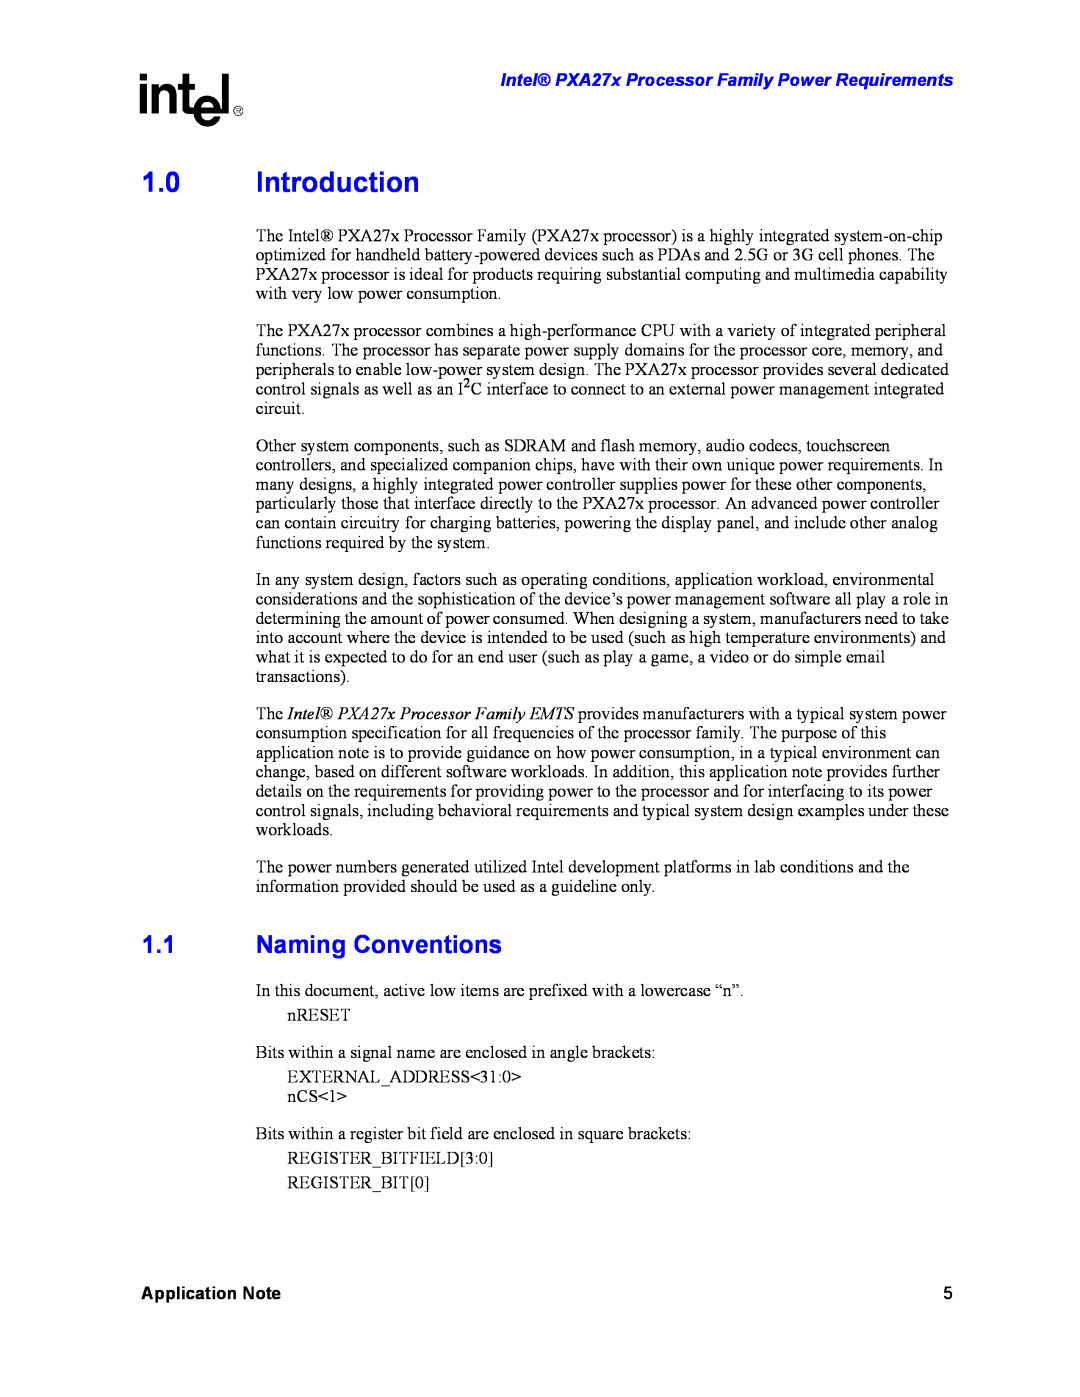 Intel PXA27X manual Introduction, Naming Conventions, Intel PXA27x Processor Family Power Requirements, Application Note 